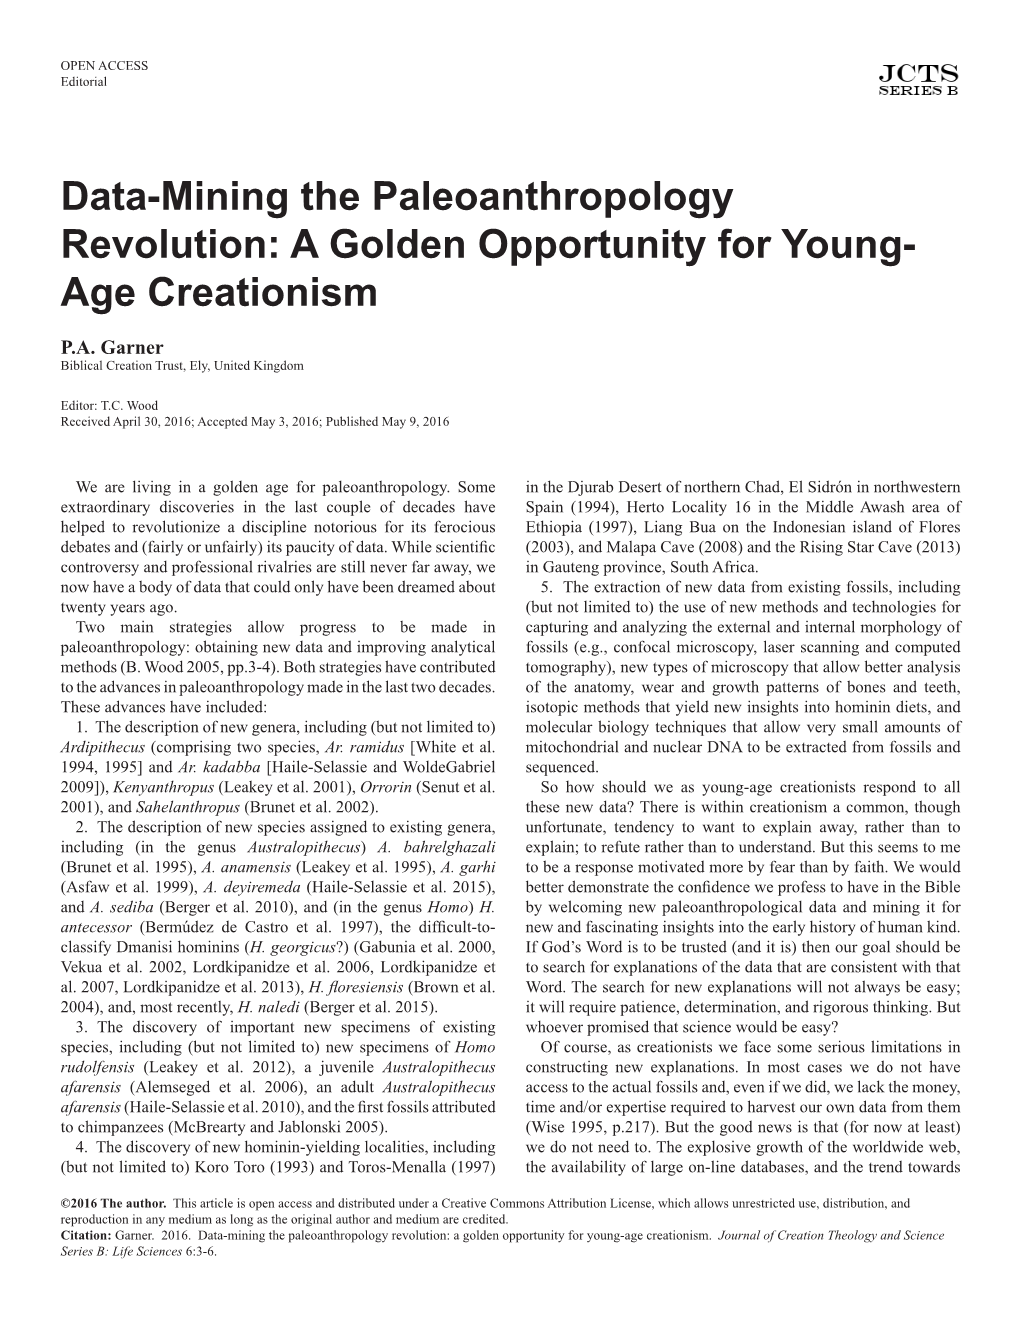 Data-Mining the Paleoanthropology Revolution: a Golden Opportunity for Young- Age Creationism P.A